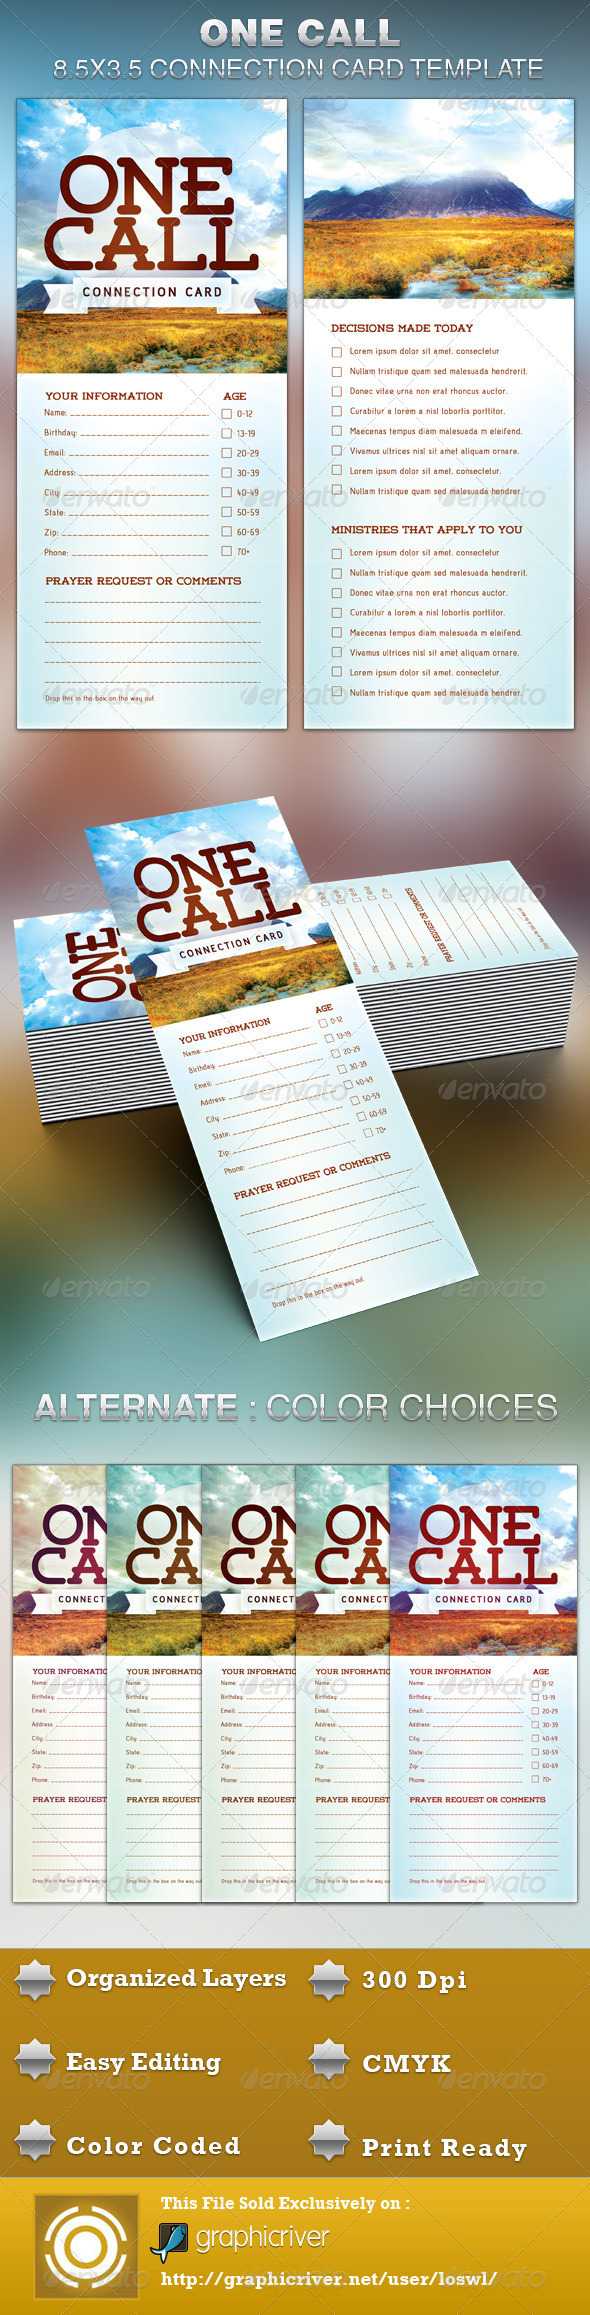 The One Call Church Connection Card Template Is Great For Throughout Decision Card Template